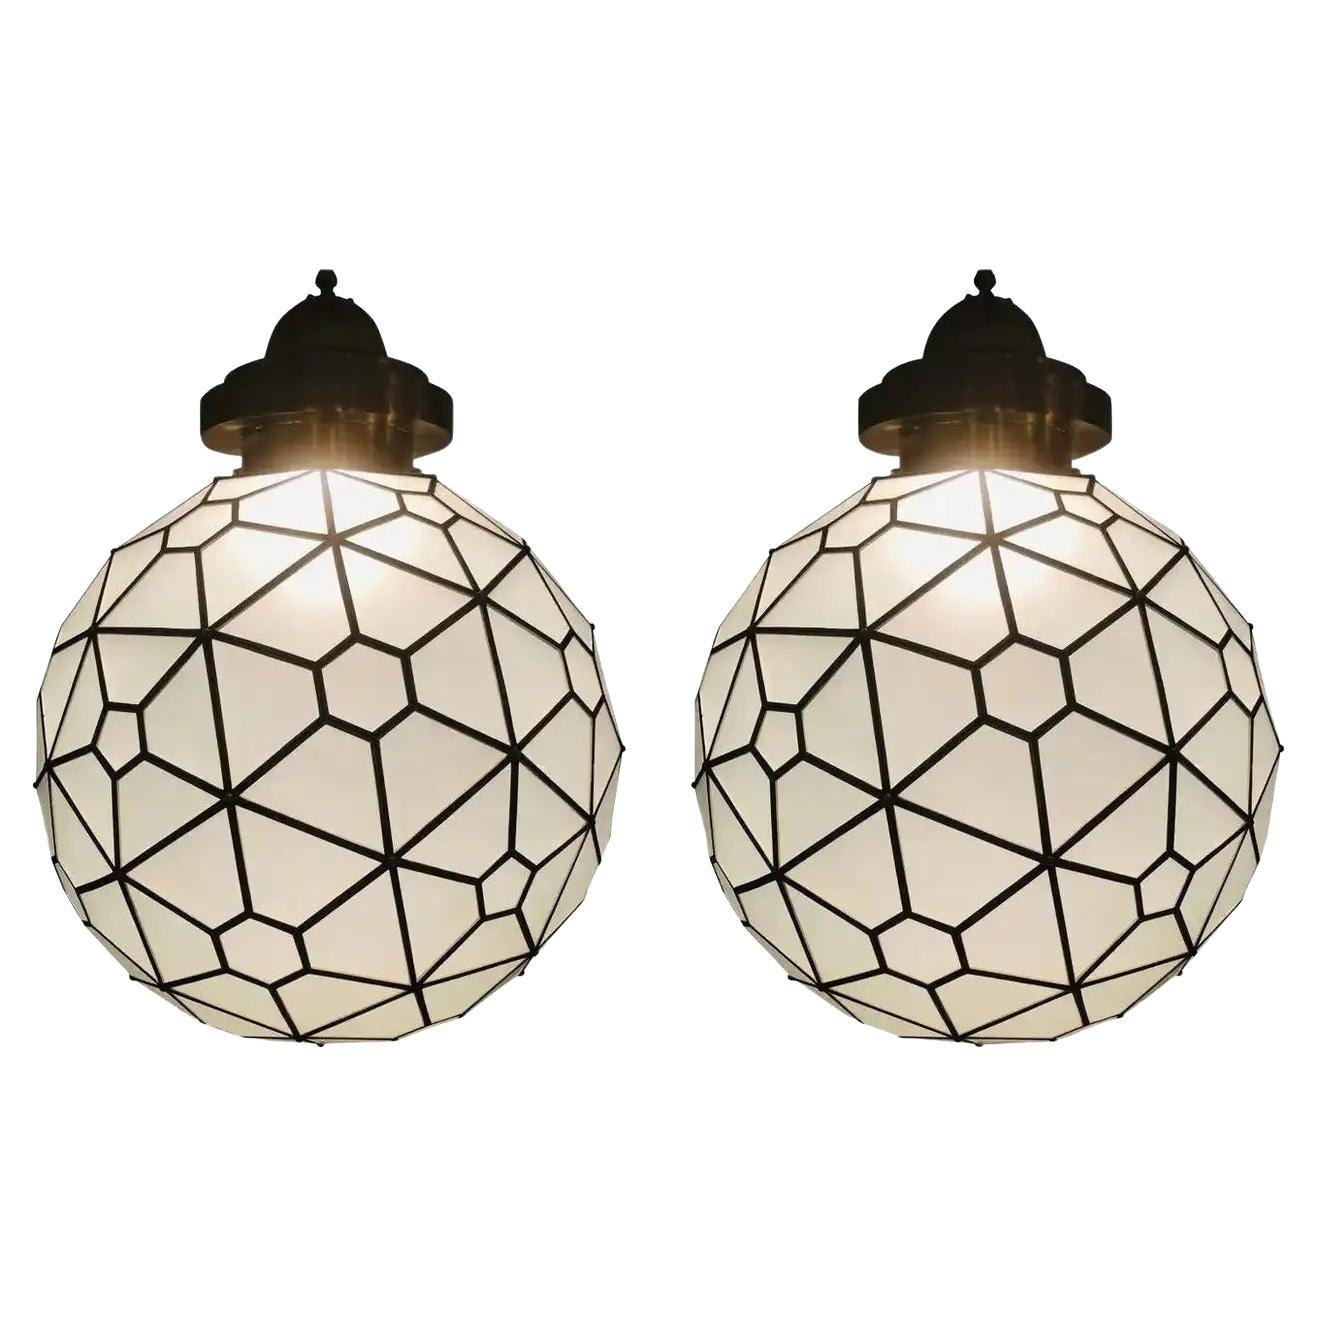 Art Deco Style Round Chandelier or Pendant, Milk Glass & Brass Inlay, a Pair